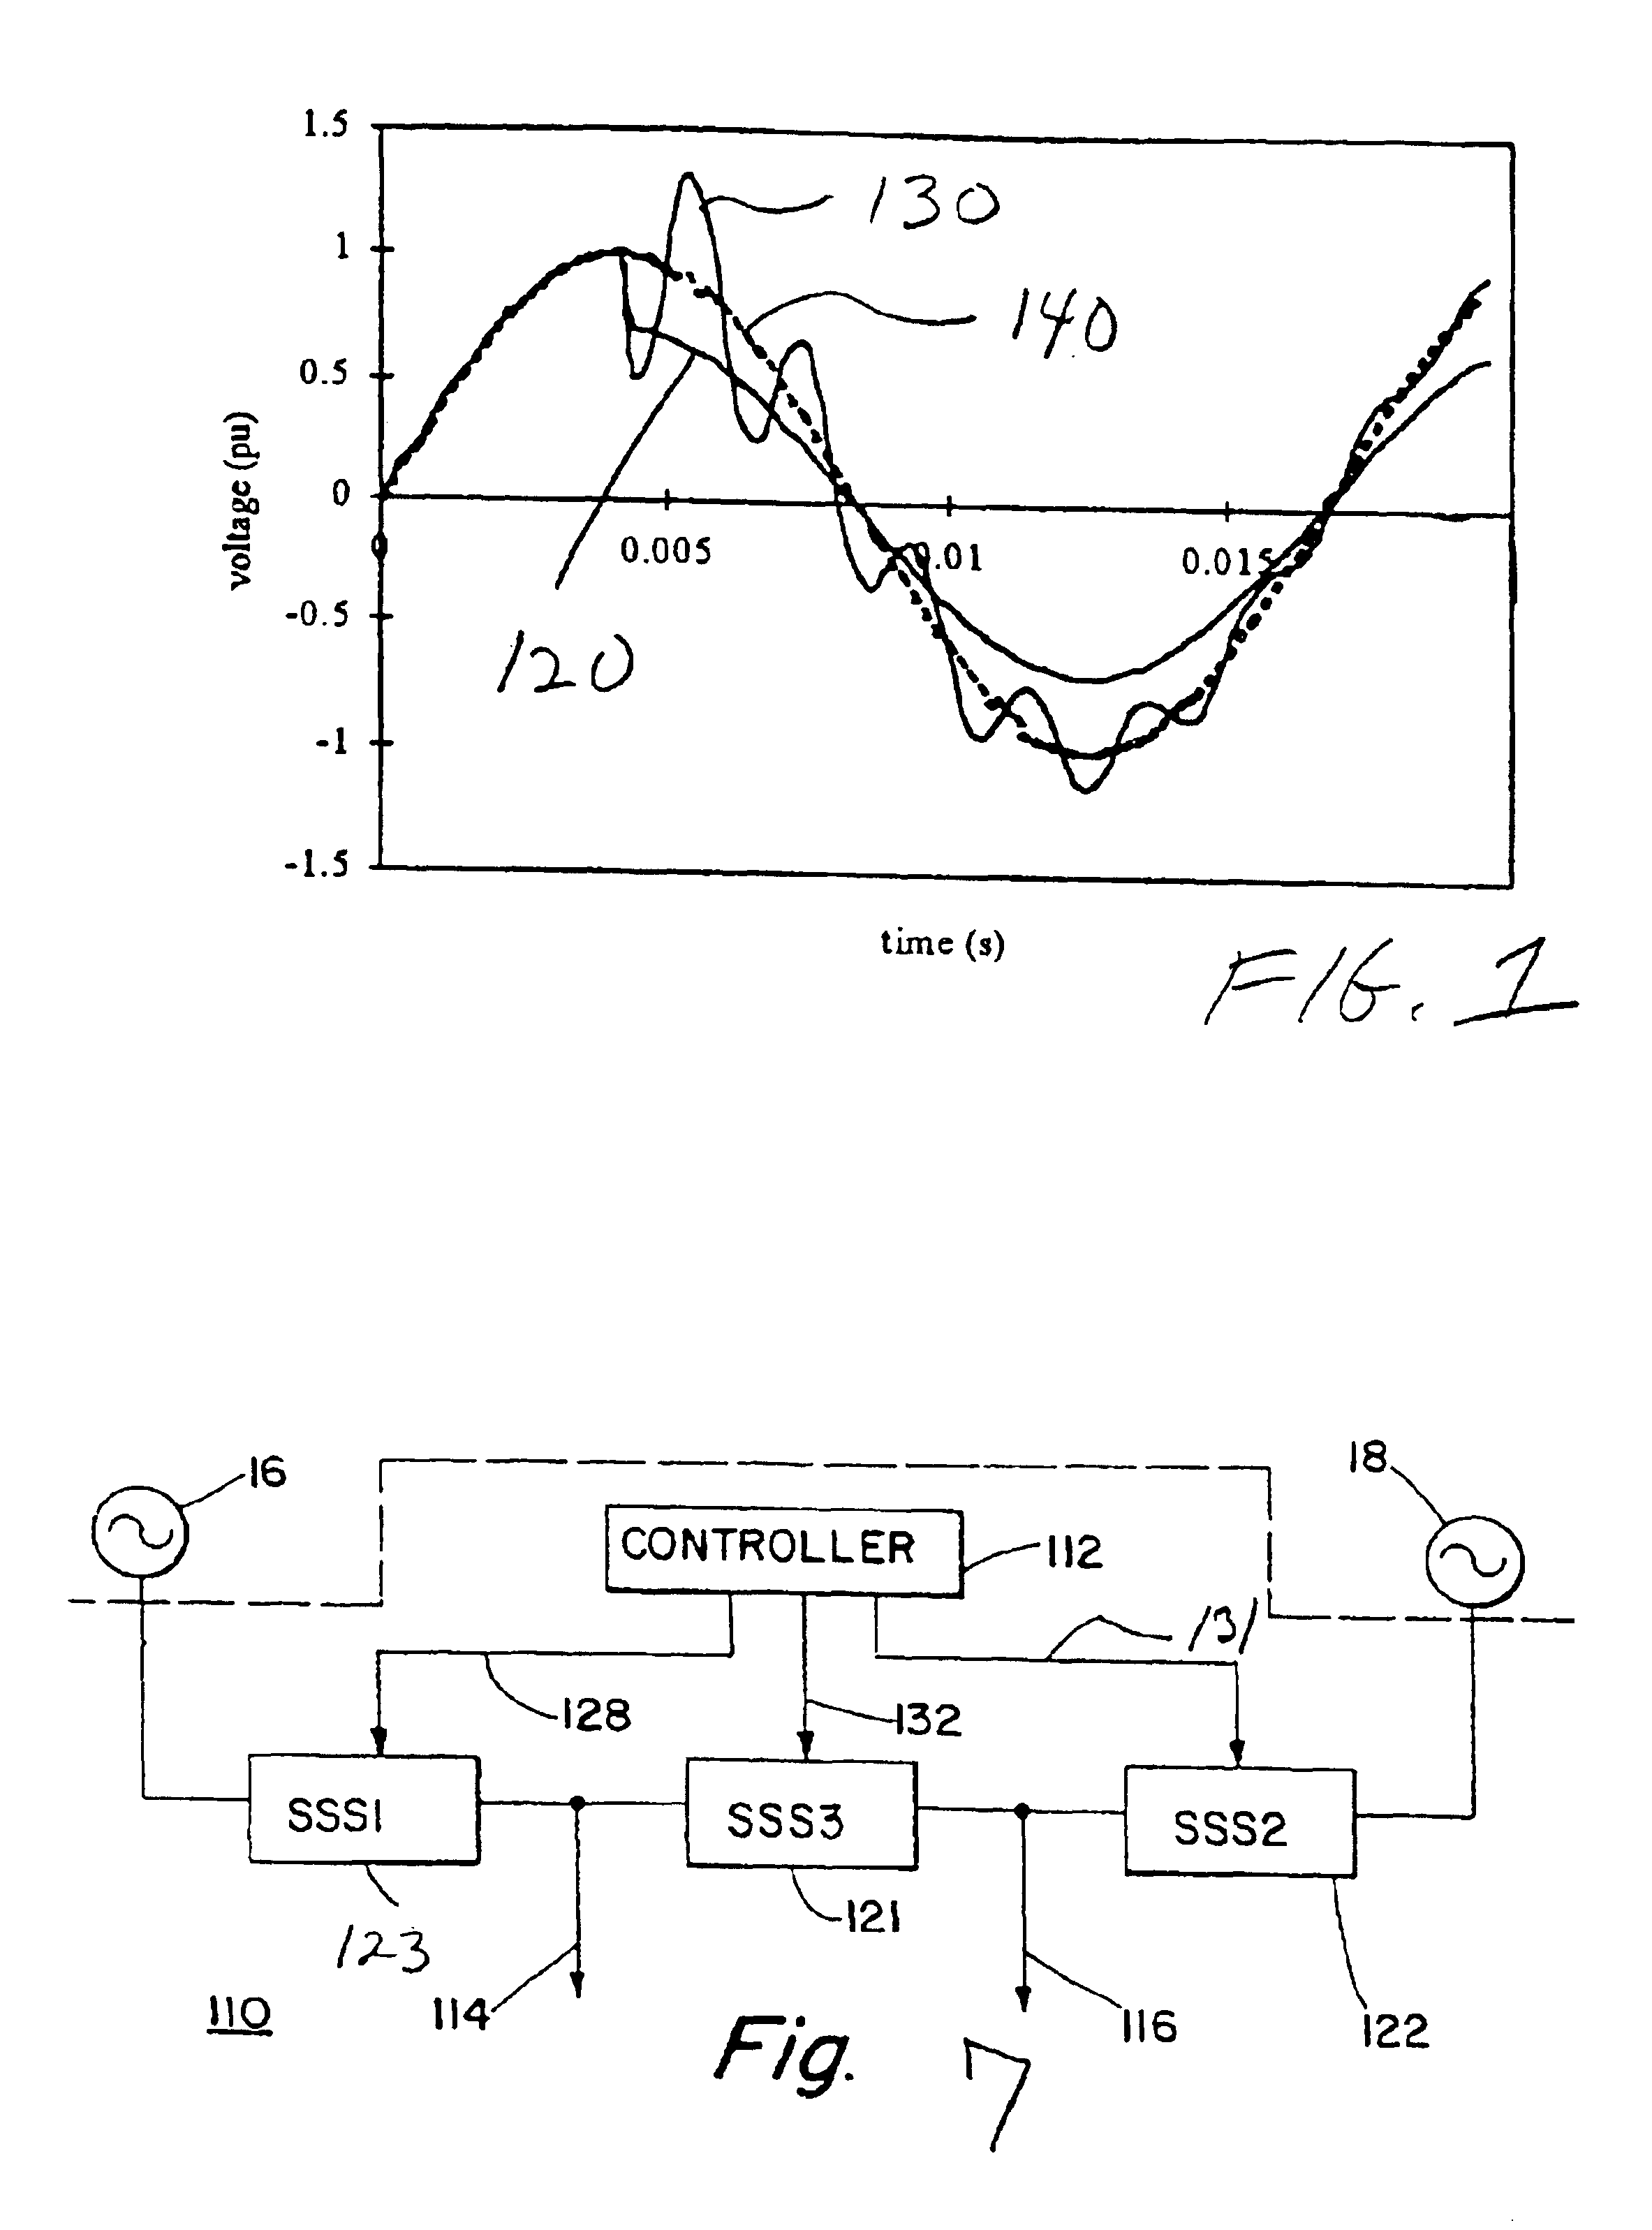 Arrangements to detect and respond to disturbances in electrical power systems